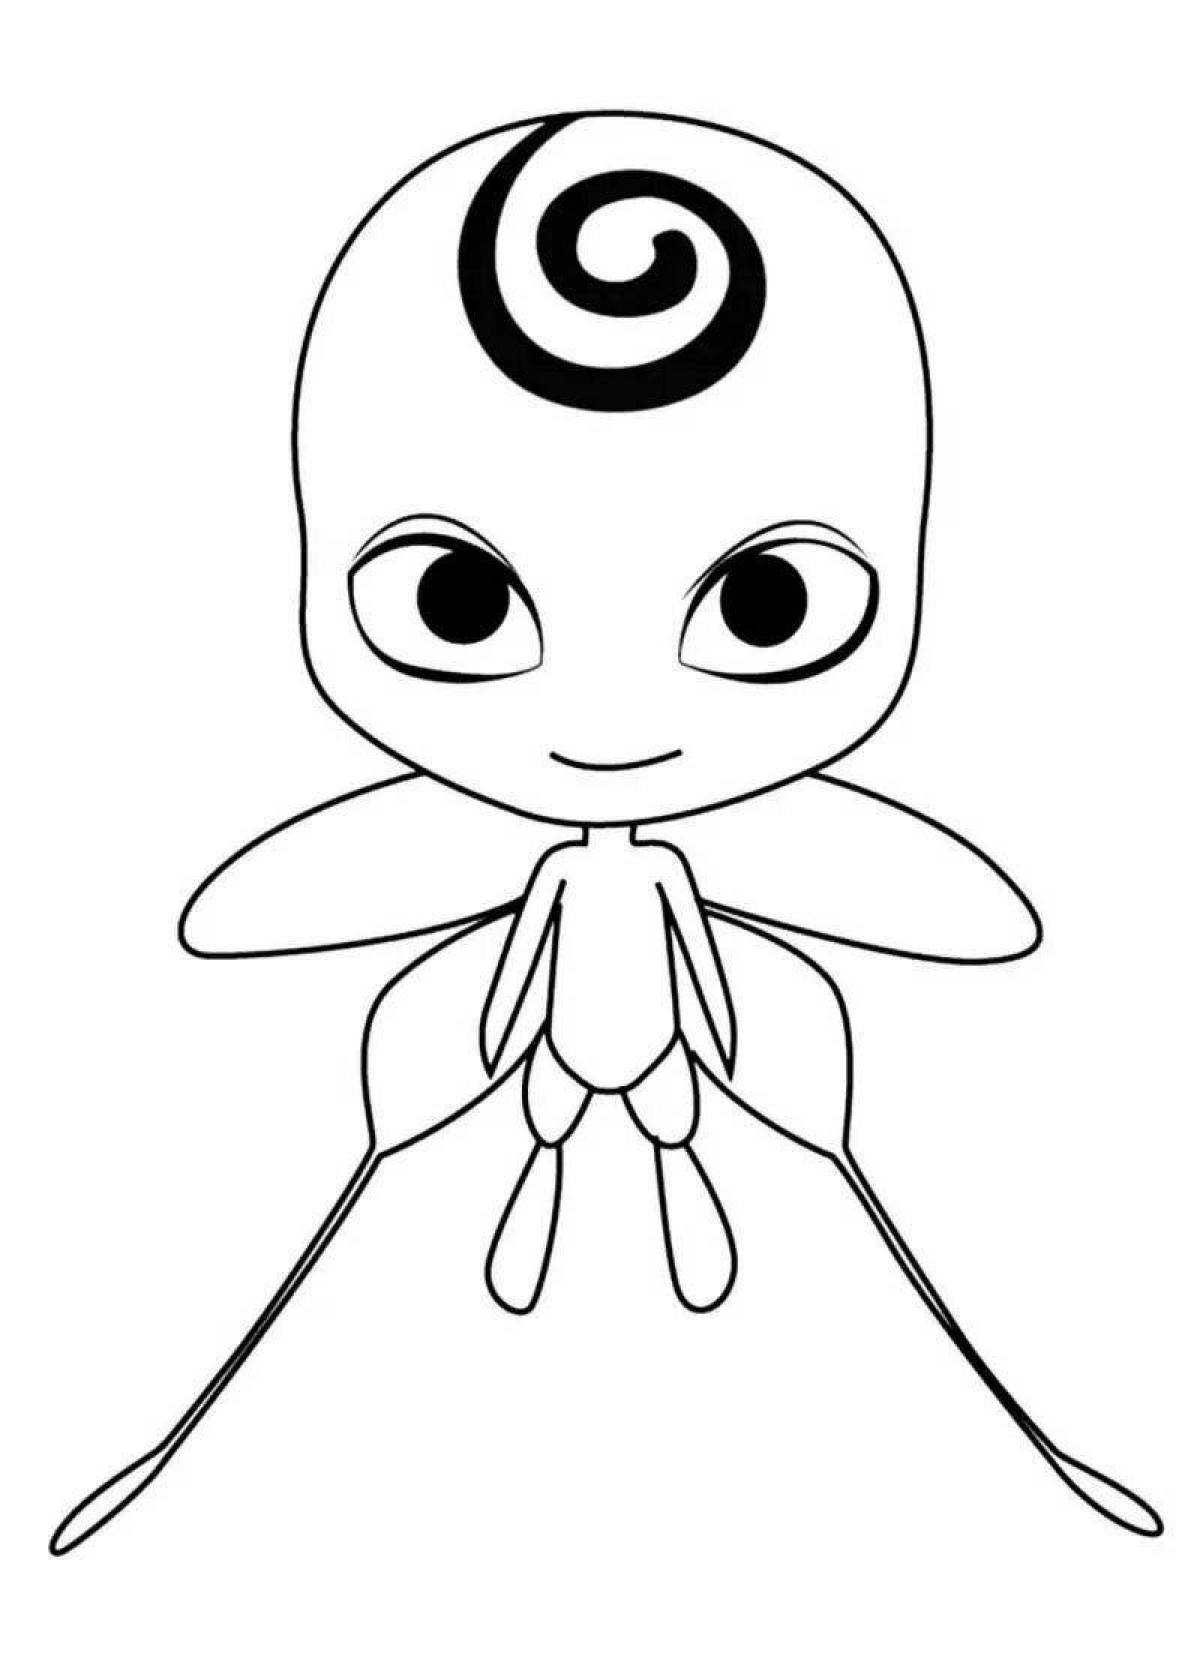 Glittering ladybug coloring page